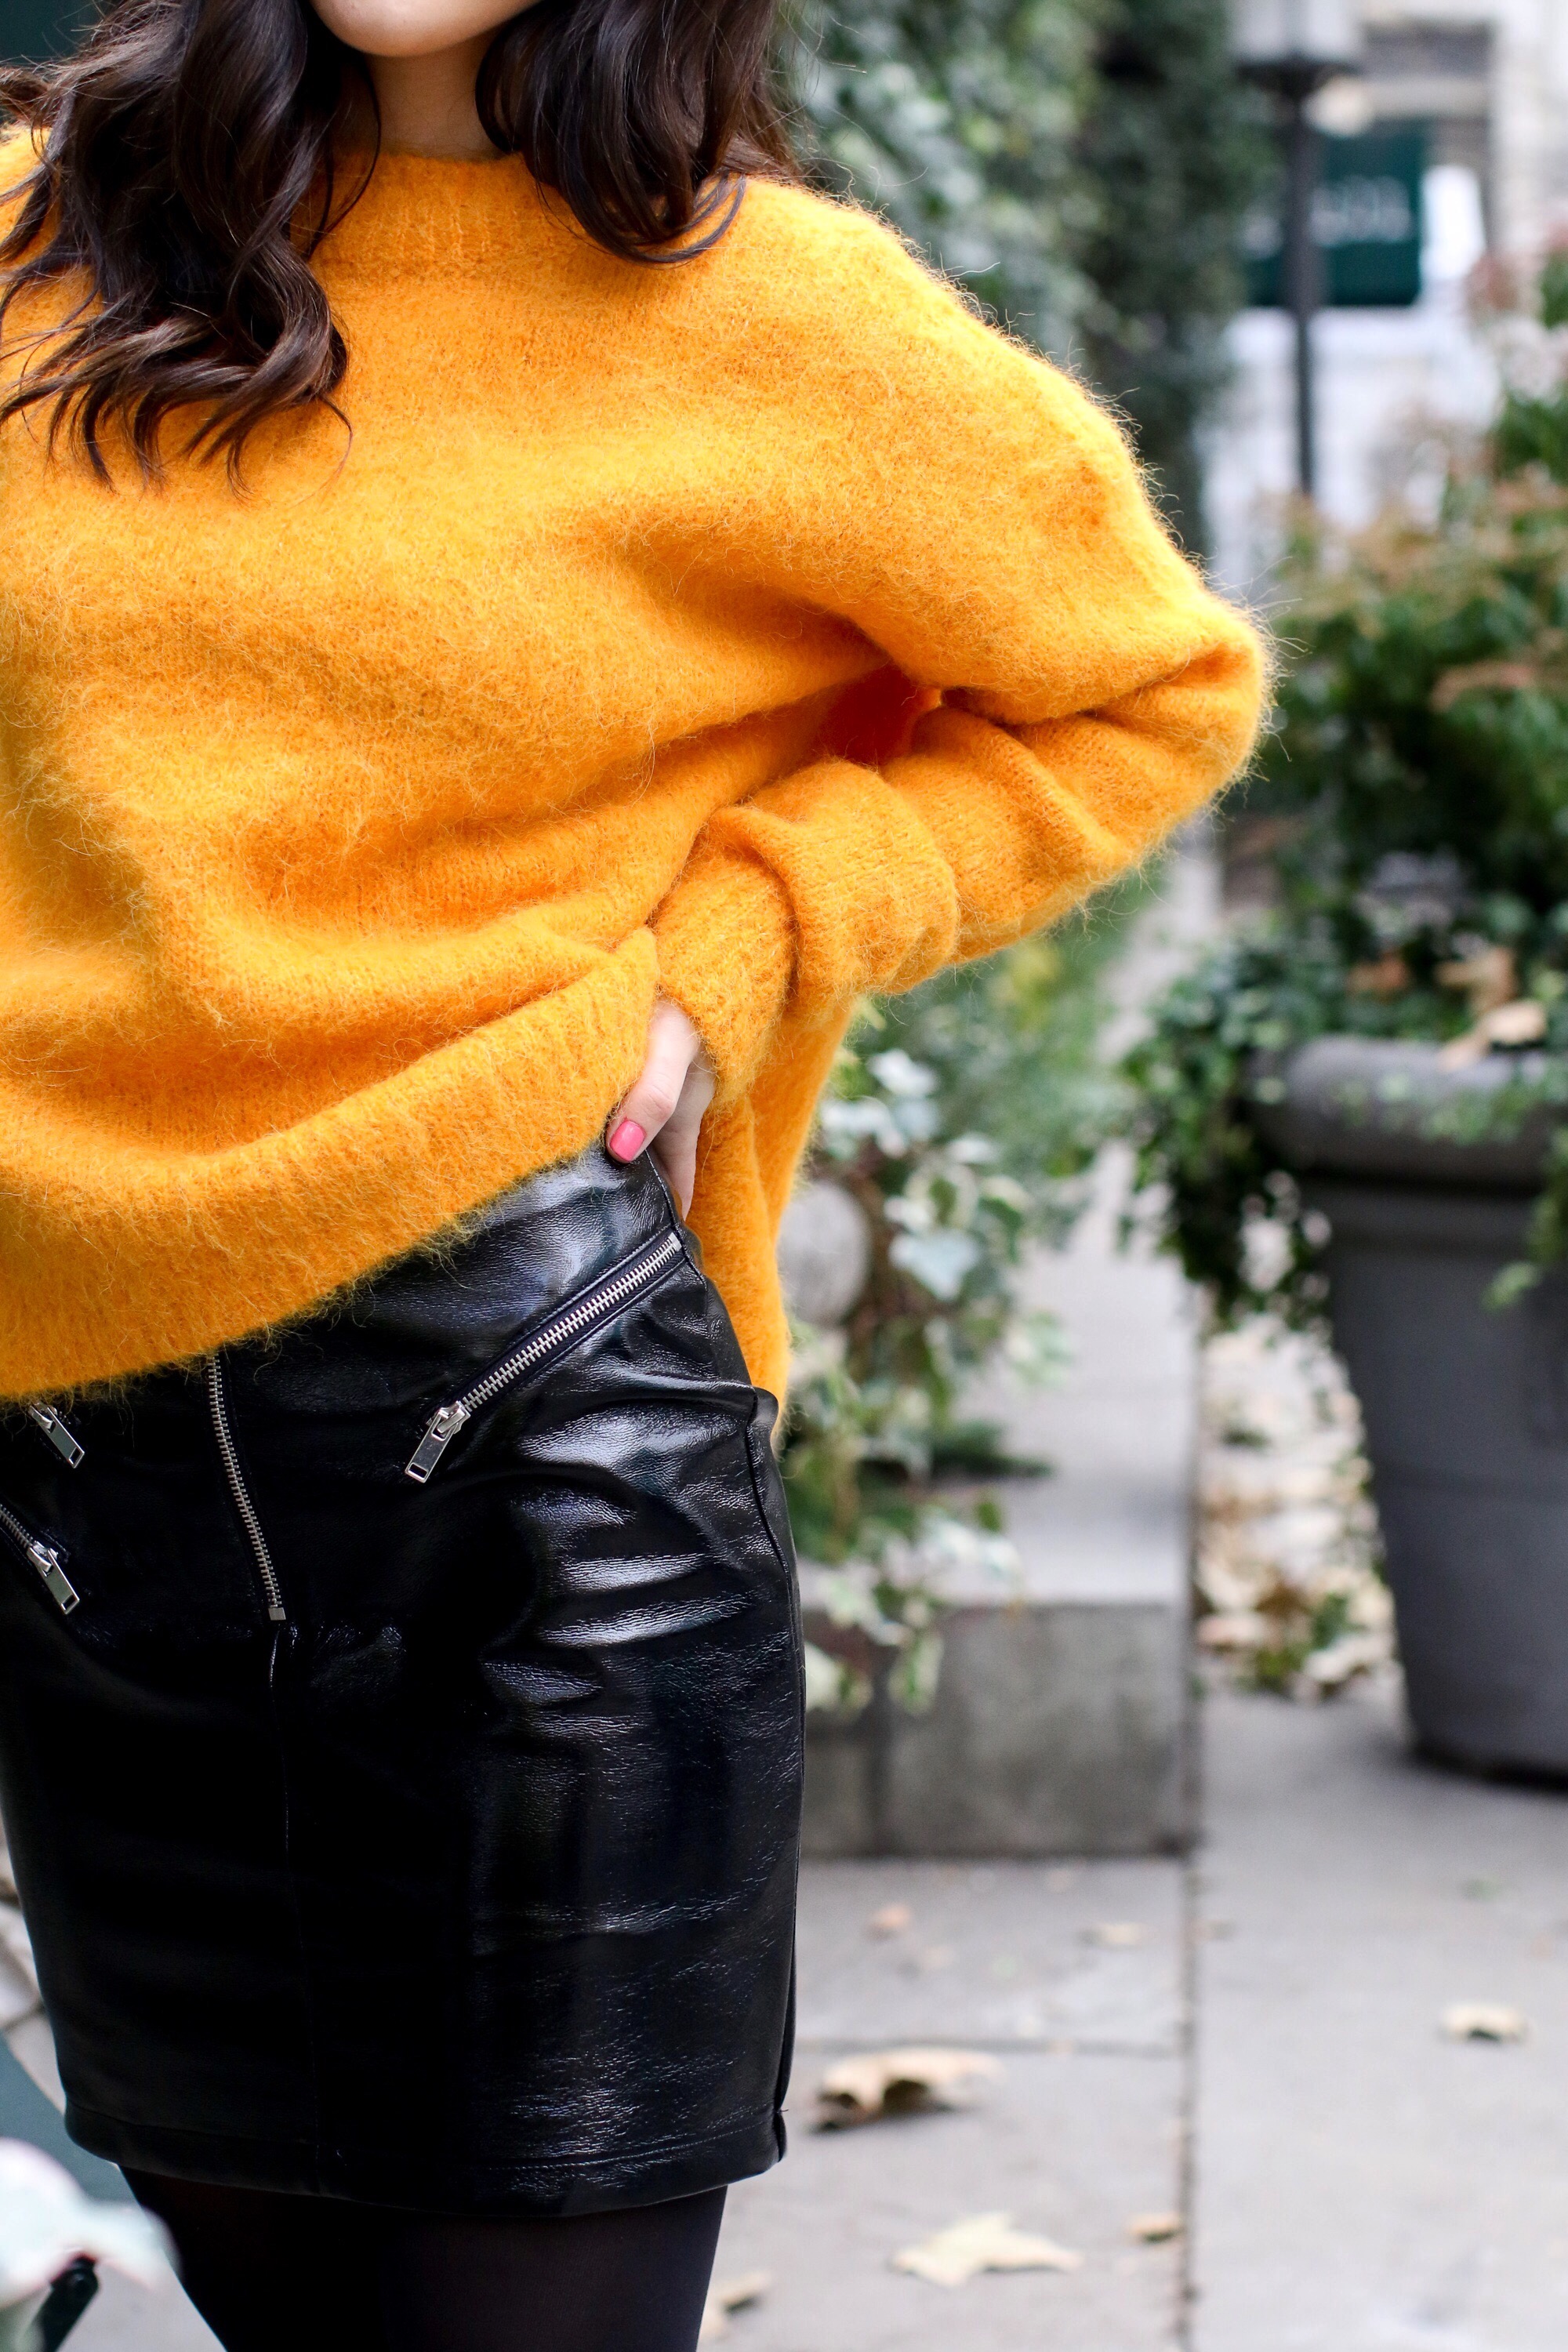 Yellow Sweater Pleather Skirt Why You Should Think Before You Unfollow Esther Santer Fashion Blog NYC Street Style Blogger Outfit OOTD Trendy Cozy Winter Look Girl Women Oversized Top New York City Instagram  Tips DSW Studded Boots H&M Topshop Details.jpg